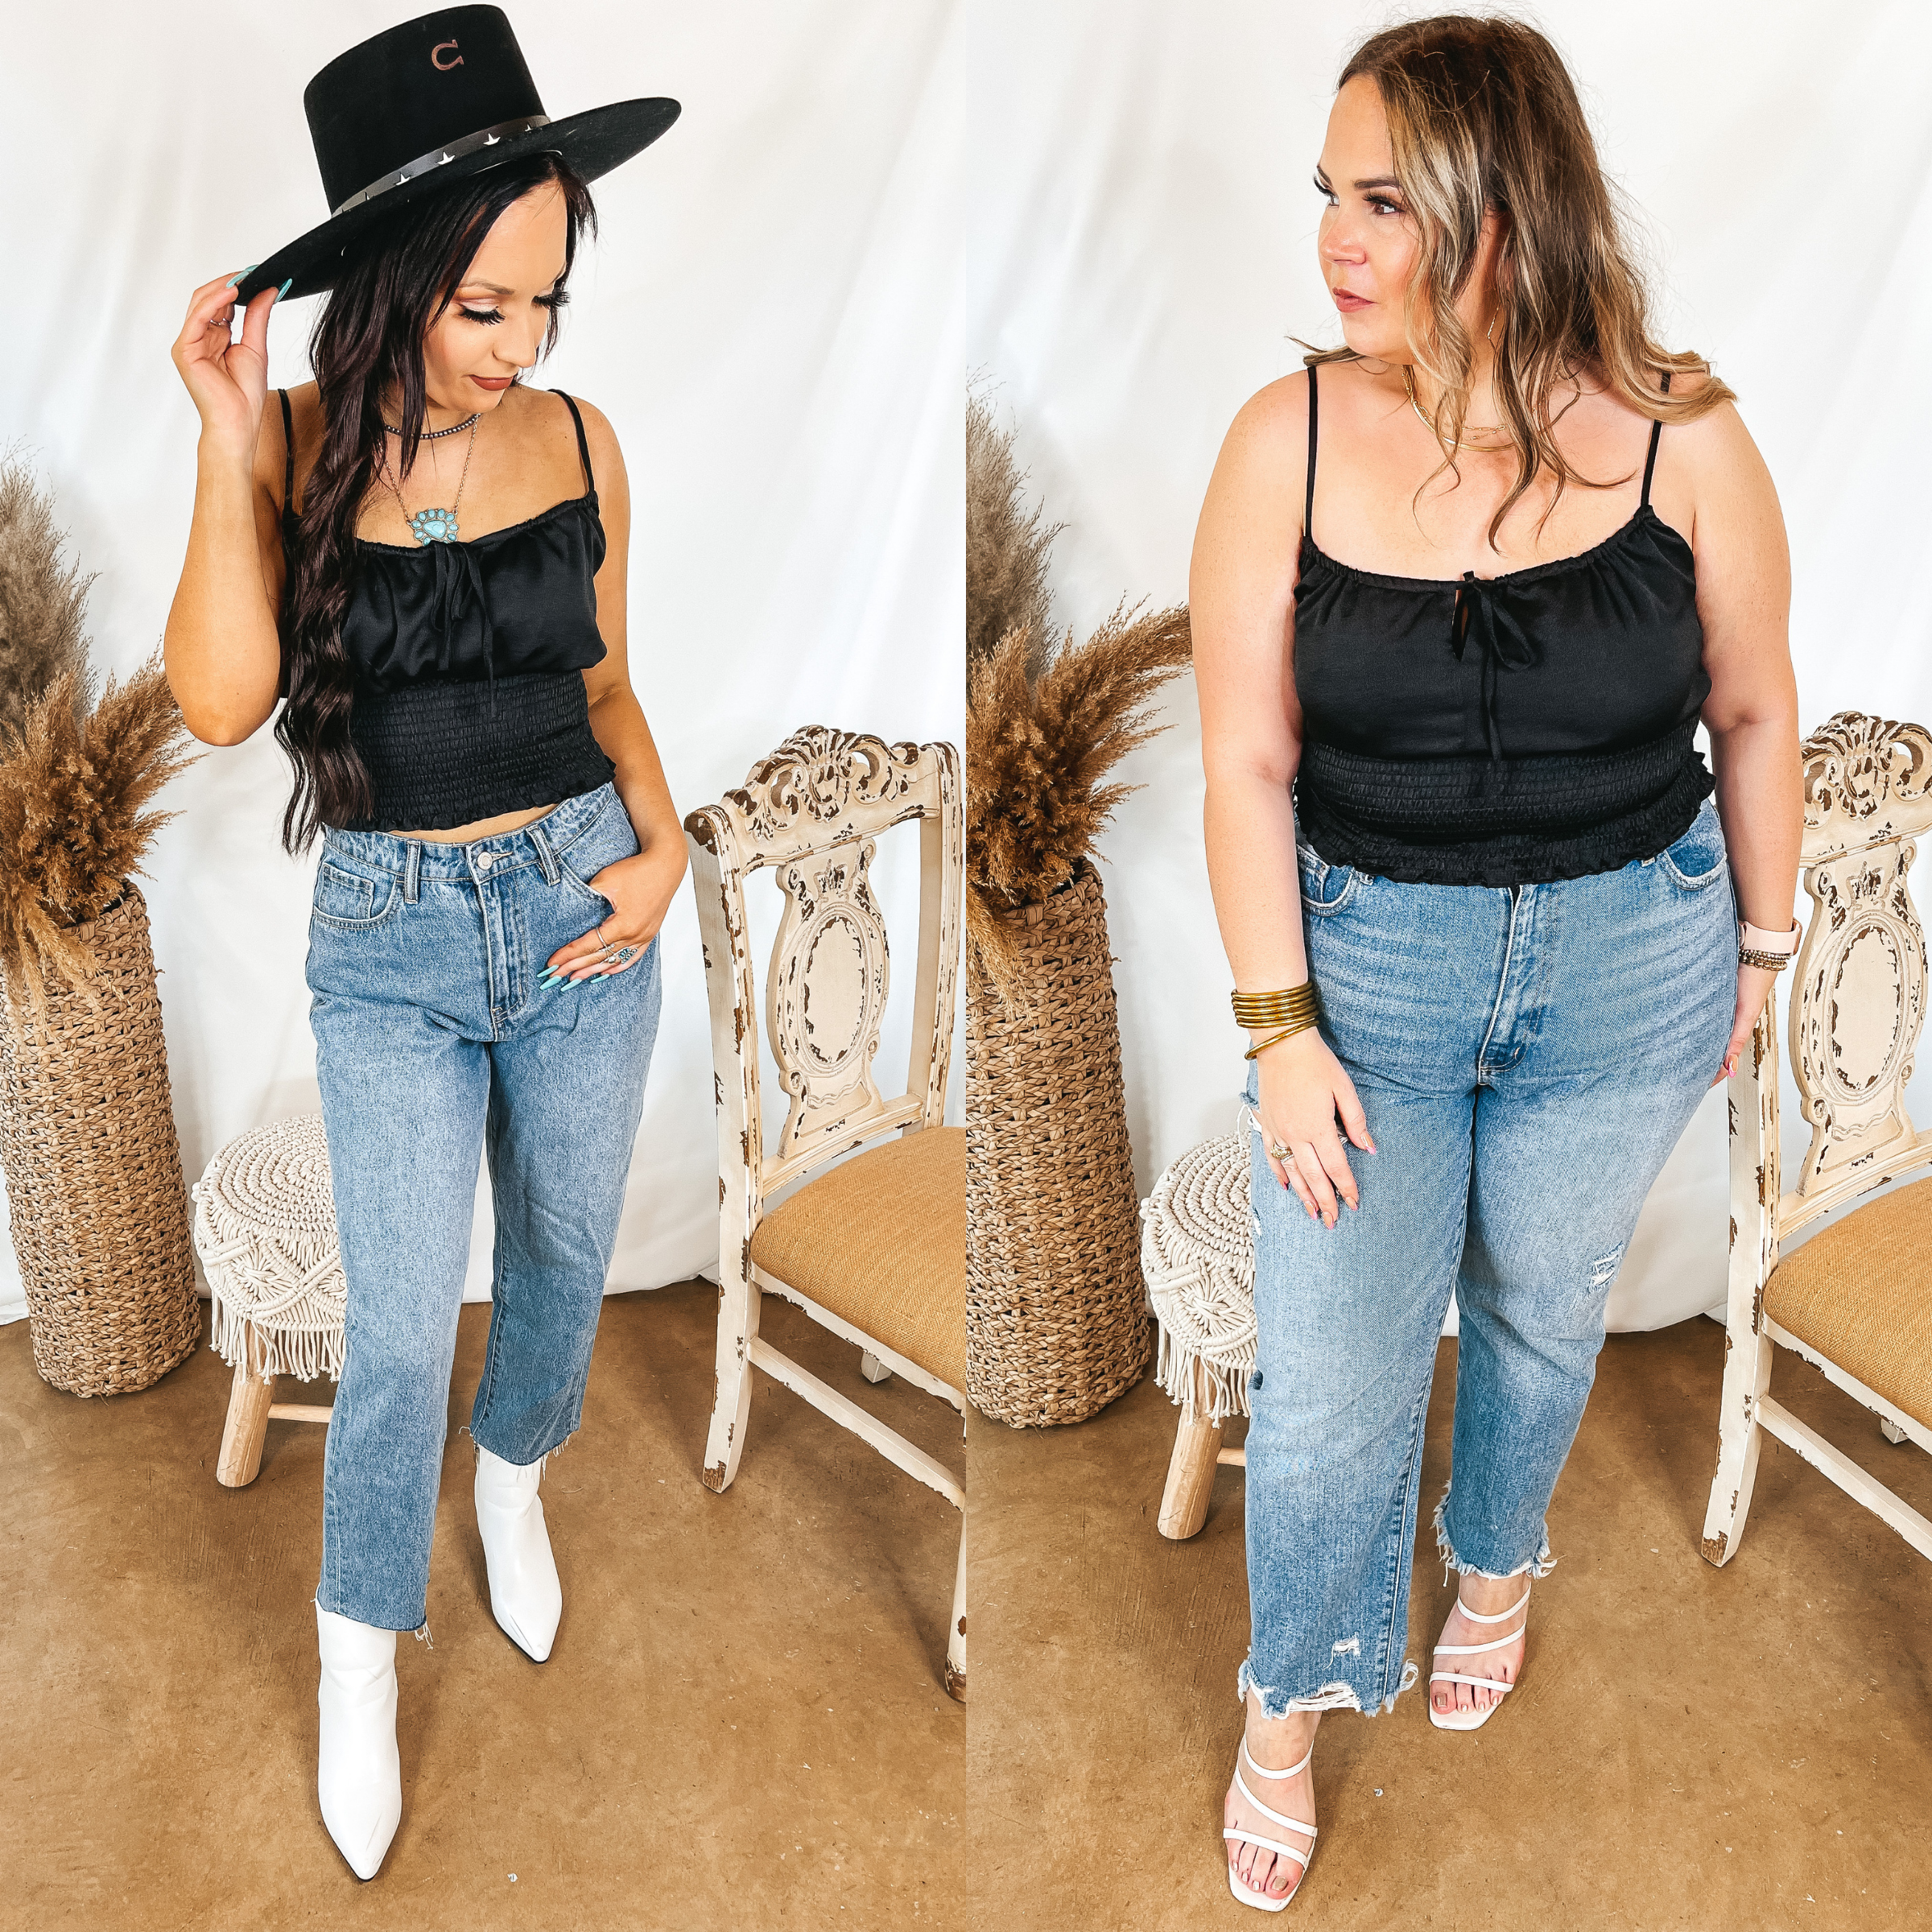 Models are wearing a spaghetti strap crop top. Size small model has it paired with light wash jeans, white booties, and a black hat. Size large model has it paired with light wash jeans, white strappy heels. and gold jewelry.